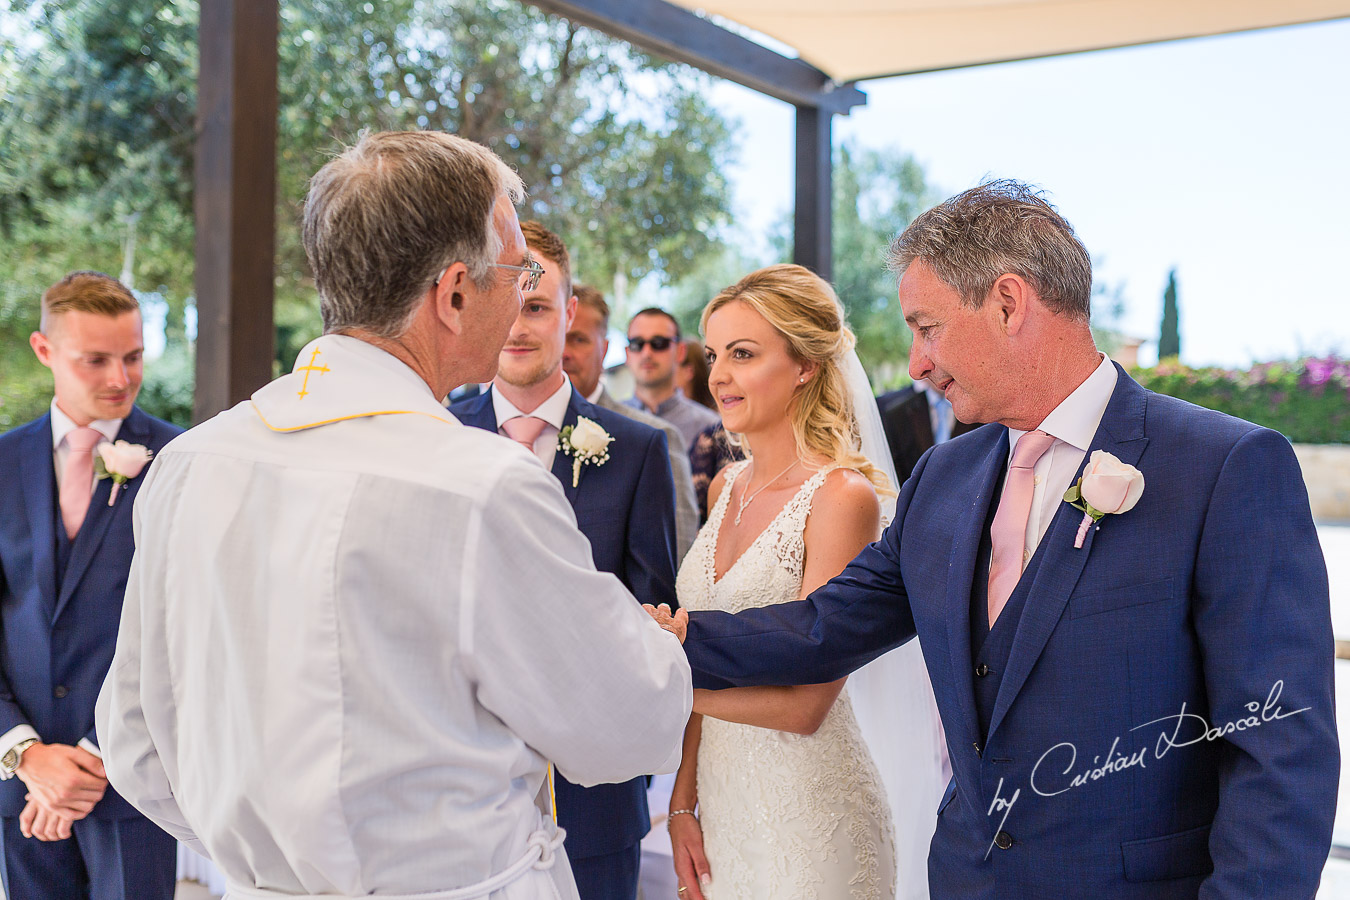 The father of the bride's reaction when the bride arrives at the wedding ceremony at Aphrodite Hills Resort in Cyprus, captured by photographer Cristian Dascalu.